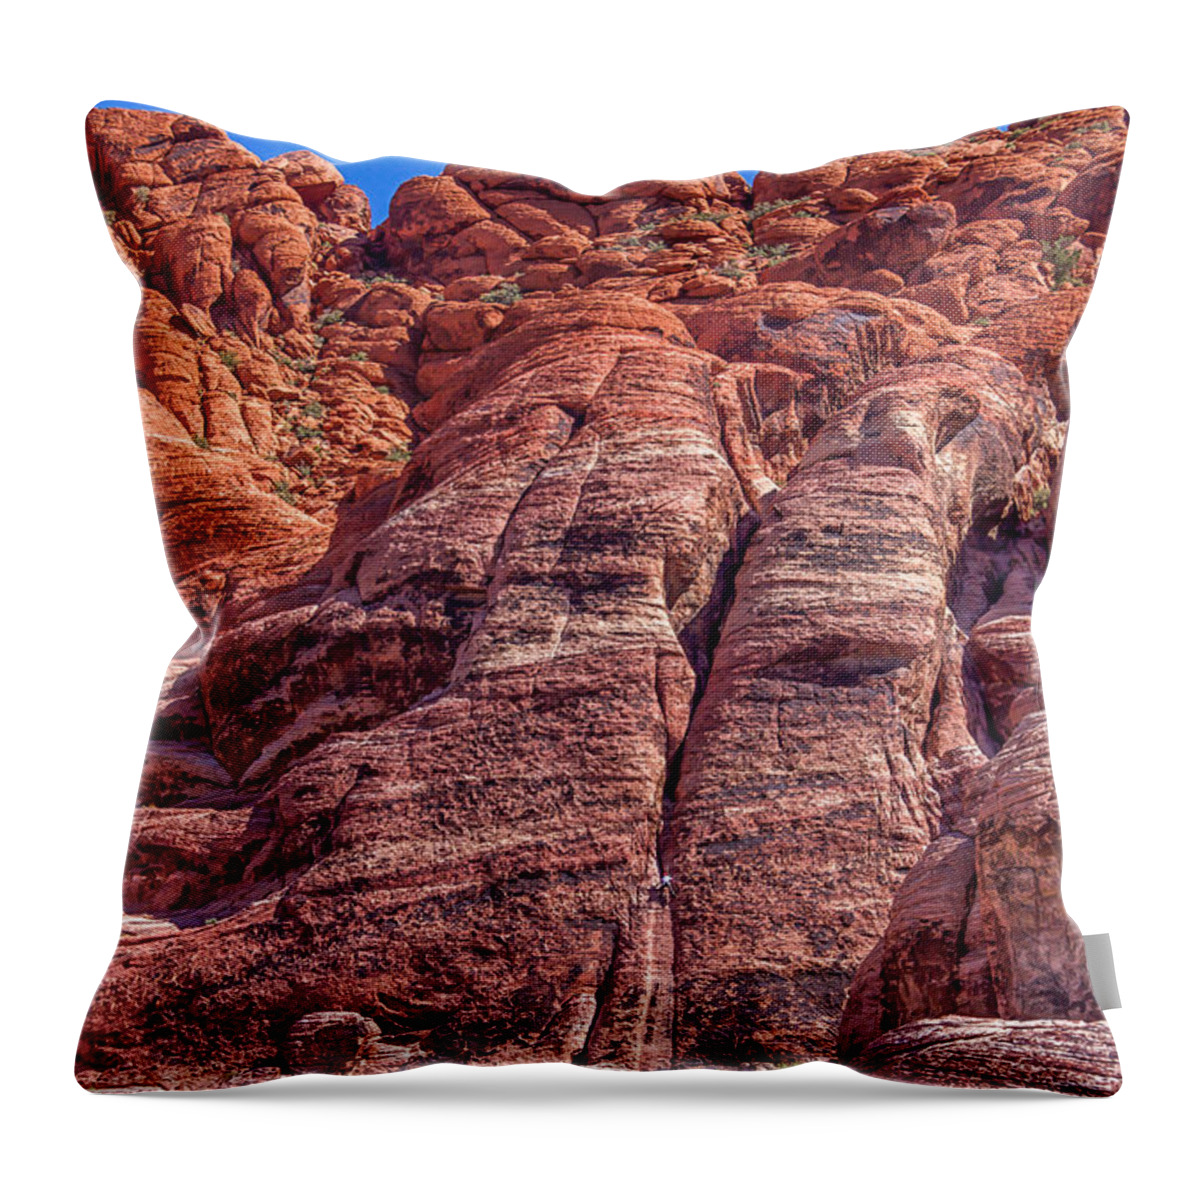  Throw Pillow featuring the photograph Red Rock Canyon National Conservation Area by Michael W Rogers